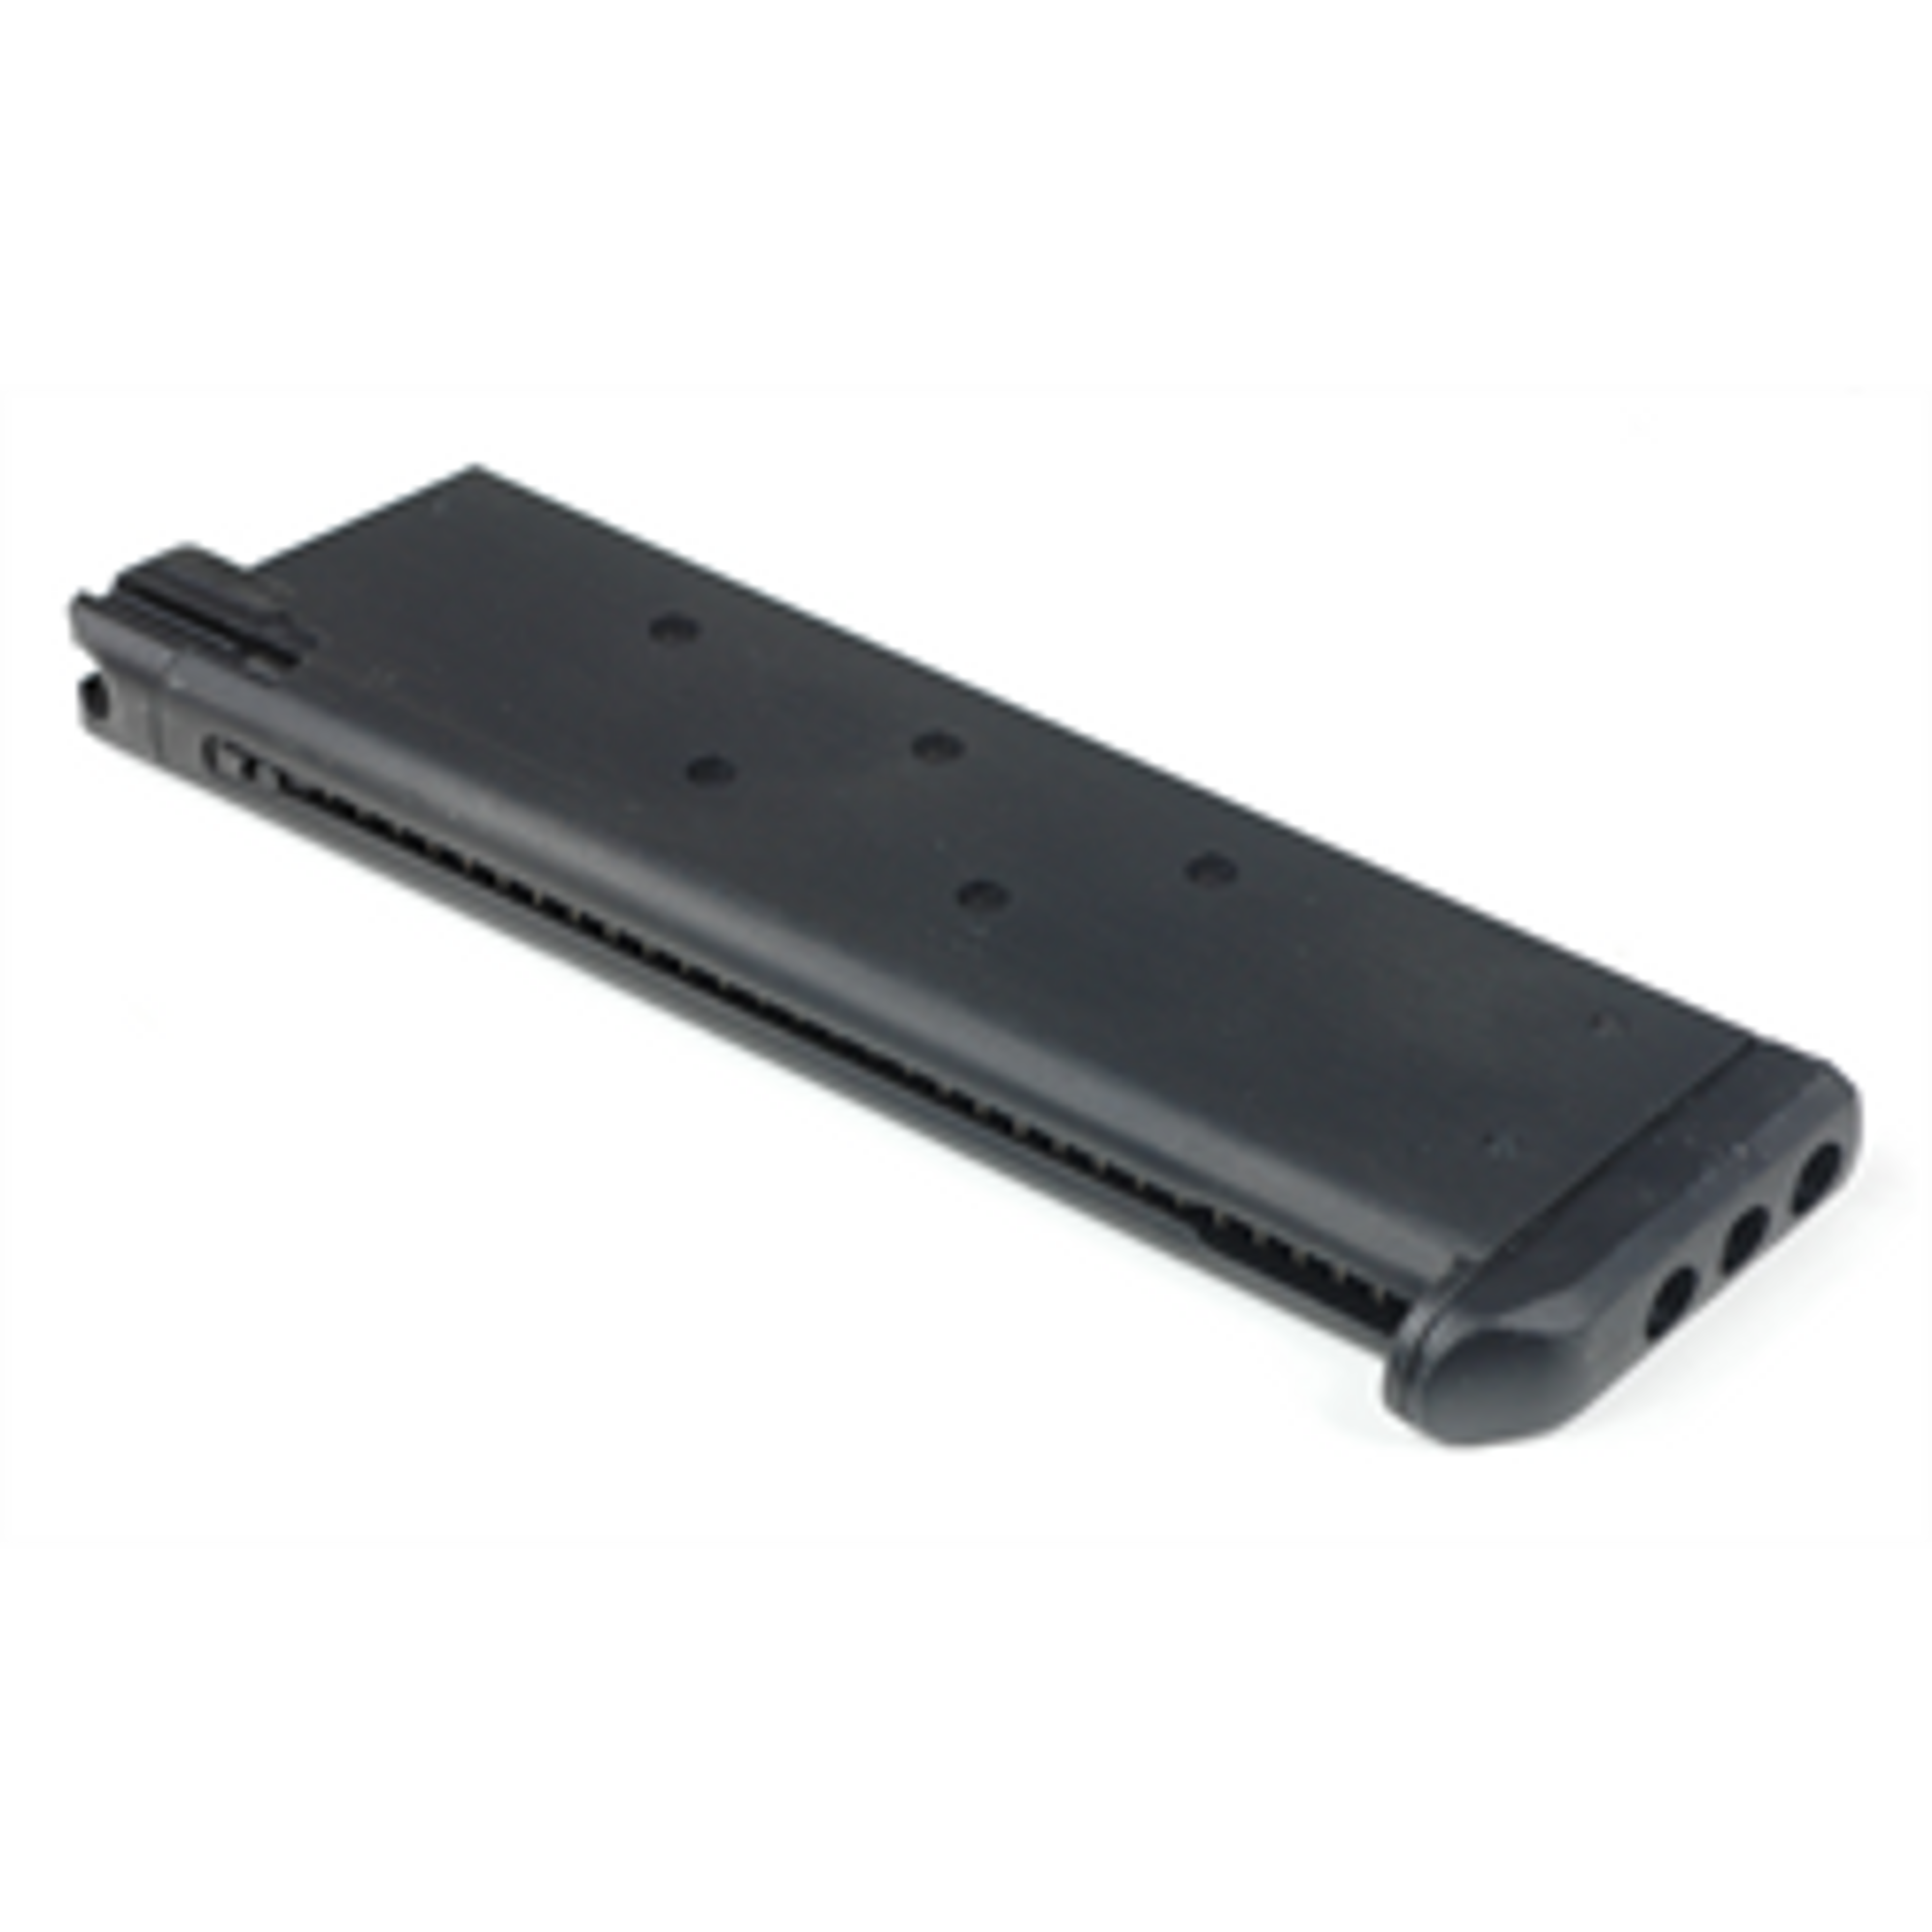 KWA 21rd Full Metal Magazine for KWA 1911 Series NS2 System Gas Blowback Pistol (Type: Tactical)